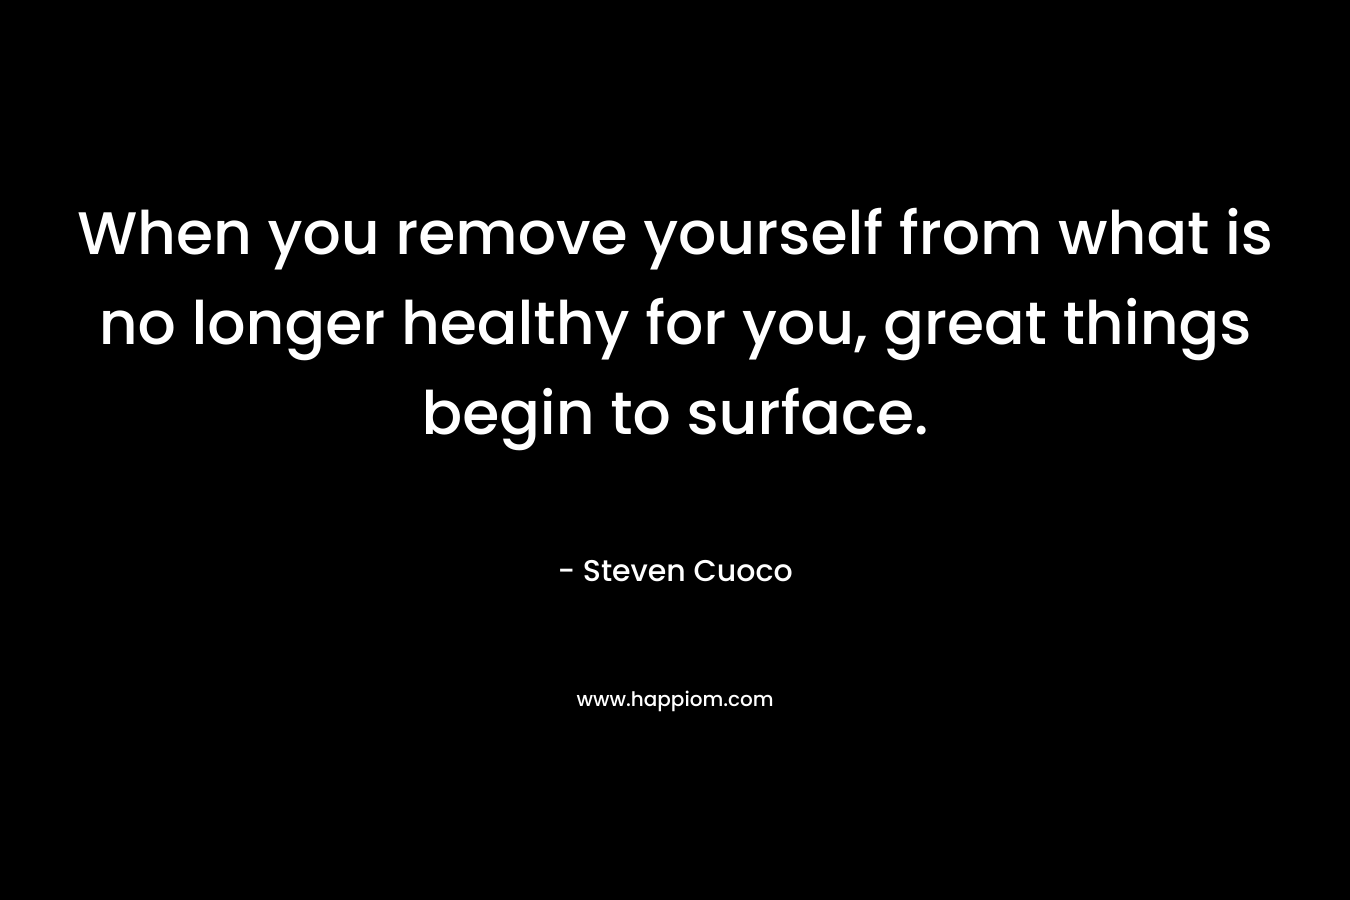 When you remove yourself from what is no longer healthy for you, great things begin to surface. – Steven Cuoco